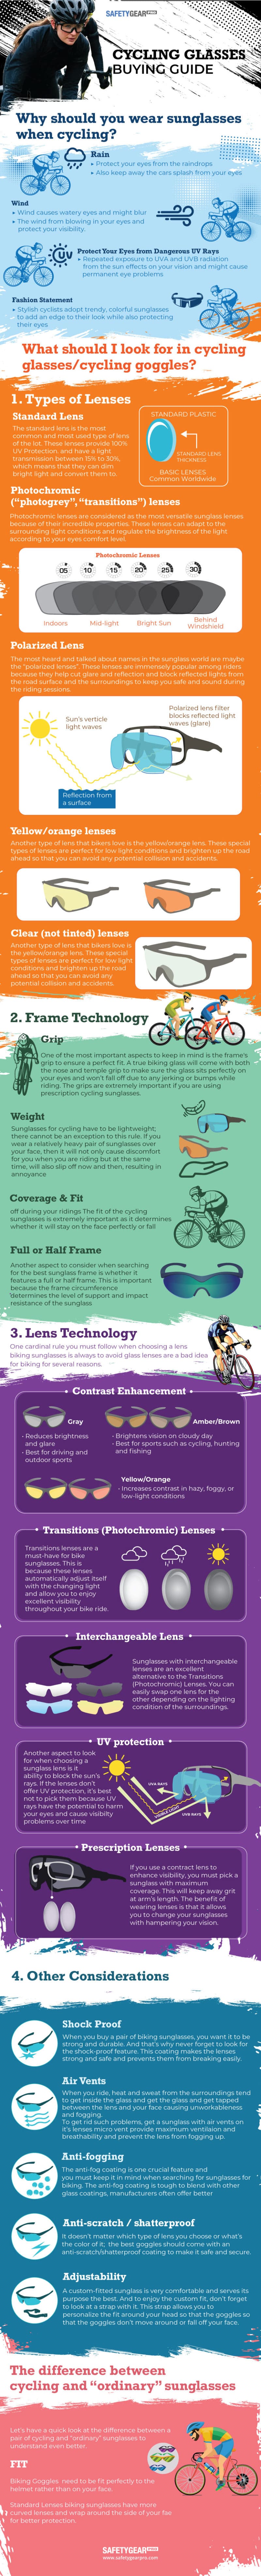 What You Must Know About Prescription Cycling Glasses Infographic